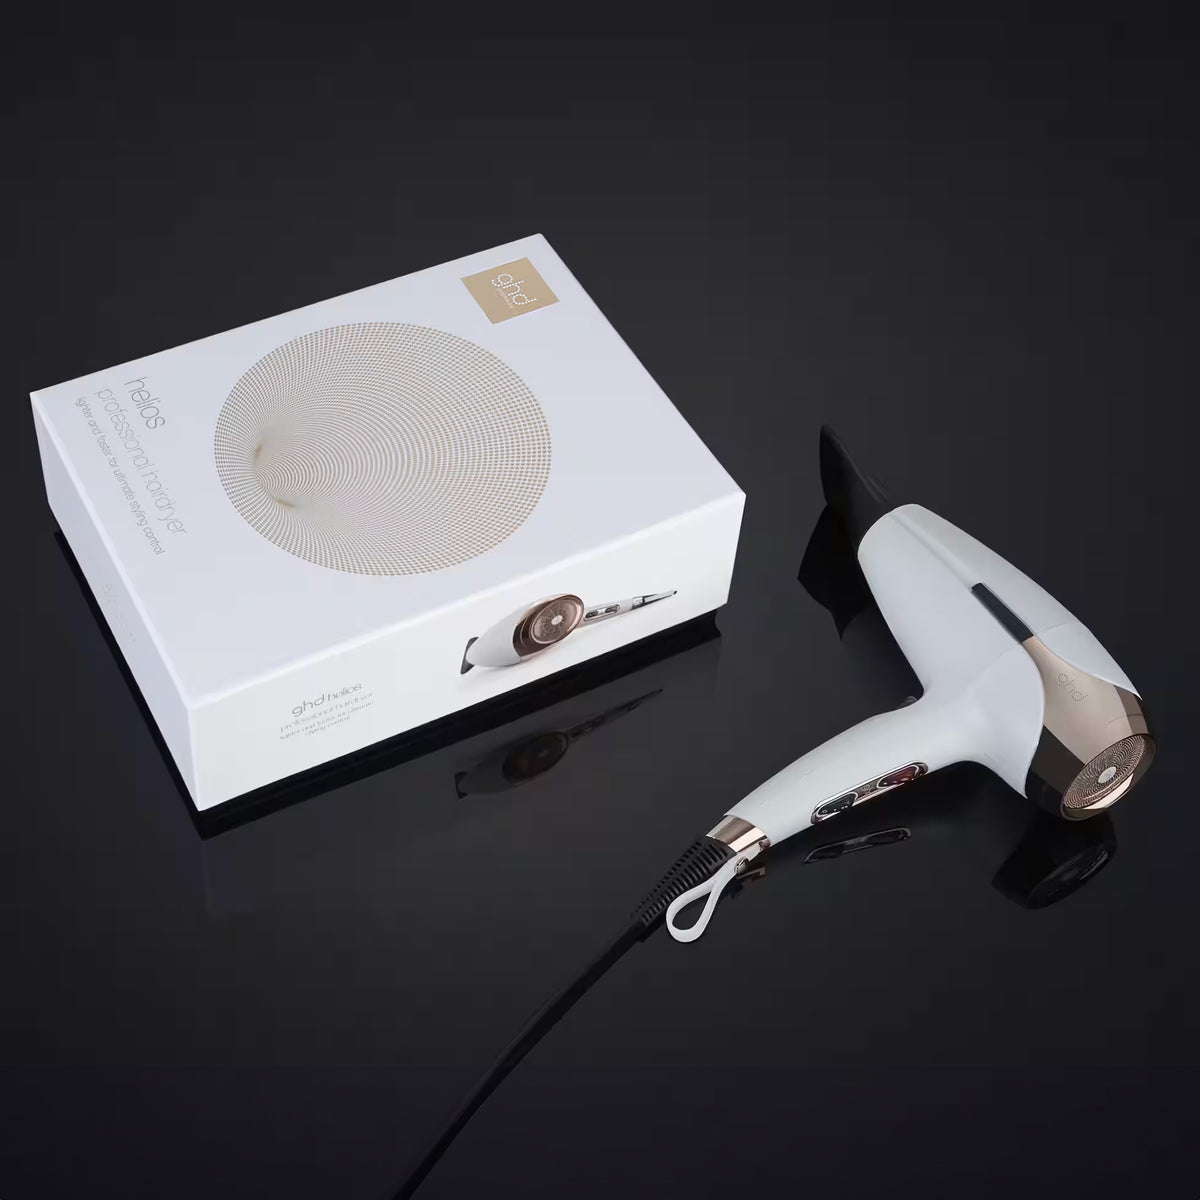 GHD Helios Professional Hair Dryer in White